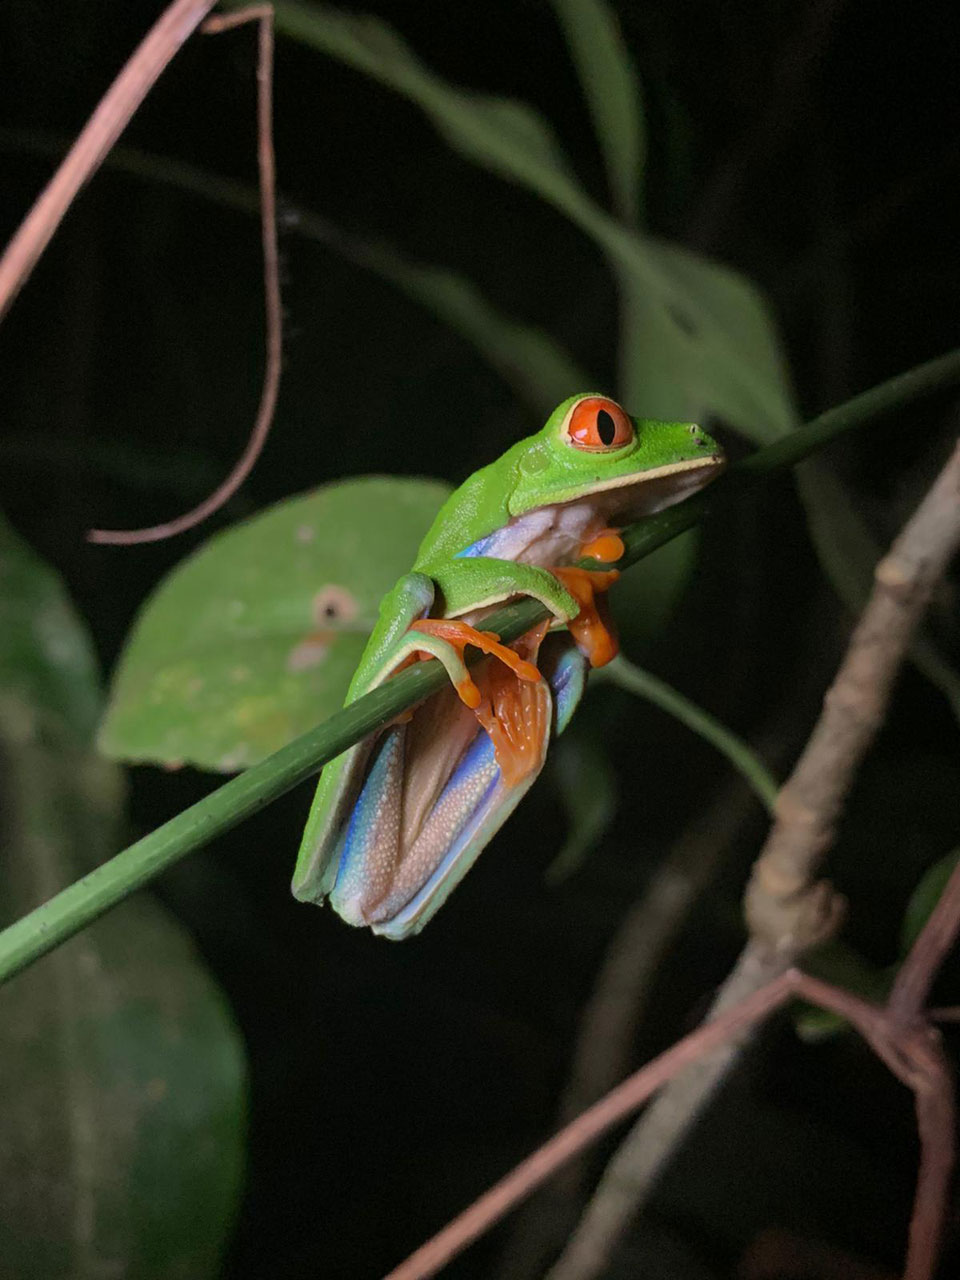 Cloud Forrest Night Life by Kiara Snadon. A red eyed tree frog in the cloud rainforest found during a night tour.